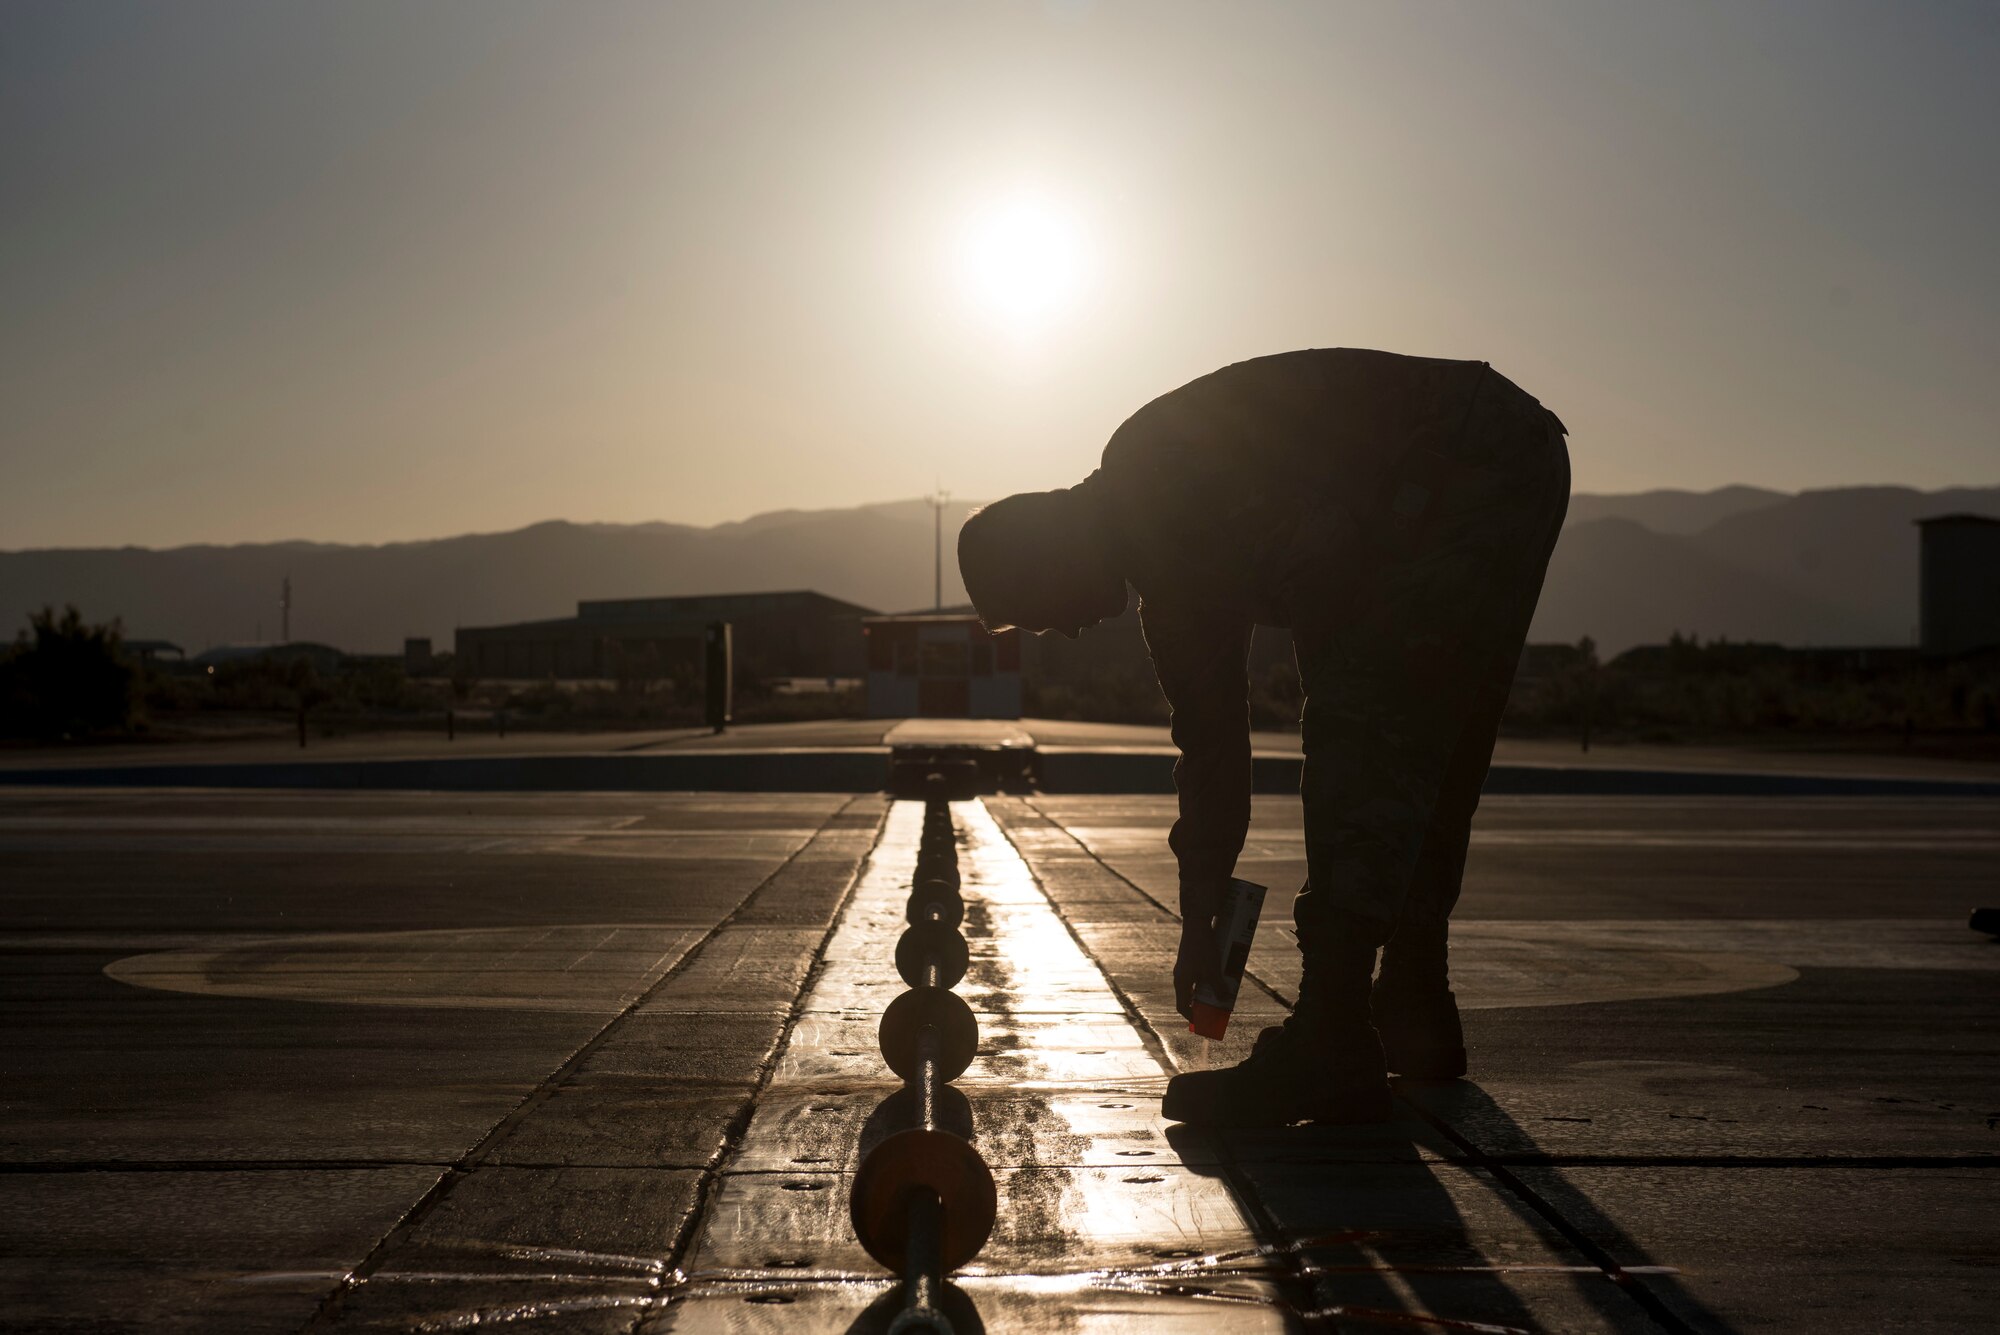 Senior Airman Wyatt Andrews, 49th Civil Engineer Squadron electrical power production technician, marks center support disks on the flightline, on Holloman Air Force Base, N.M., April 21, 2020. Andrews marks the disks to obtain proper spacing. The cable also sits 2 inches off the ground to engage an aircraft’s tailhook, in the event of an emergency. (U.S. Air Force photo by Staff Sgt. Christine Groening)